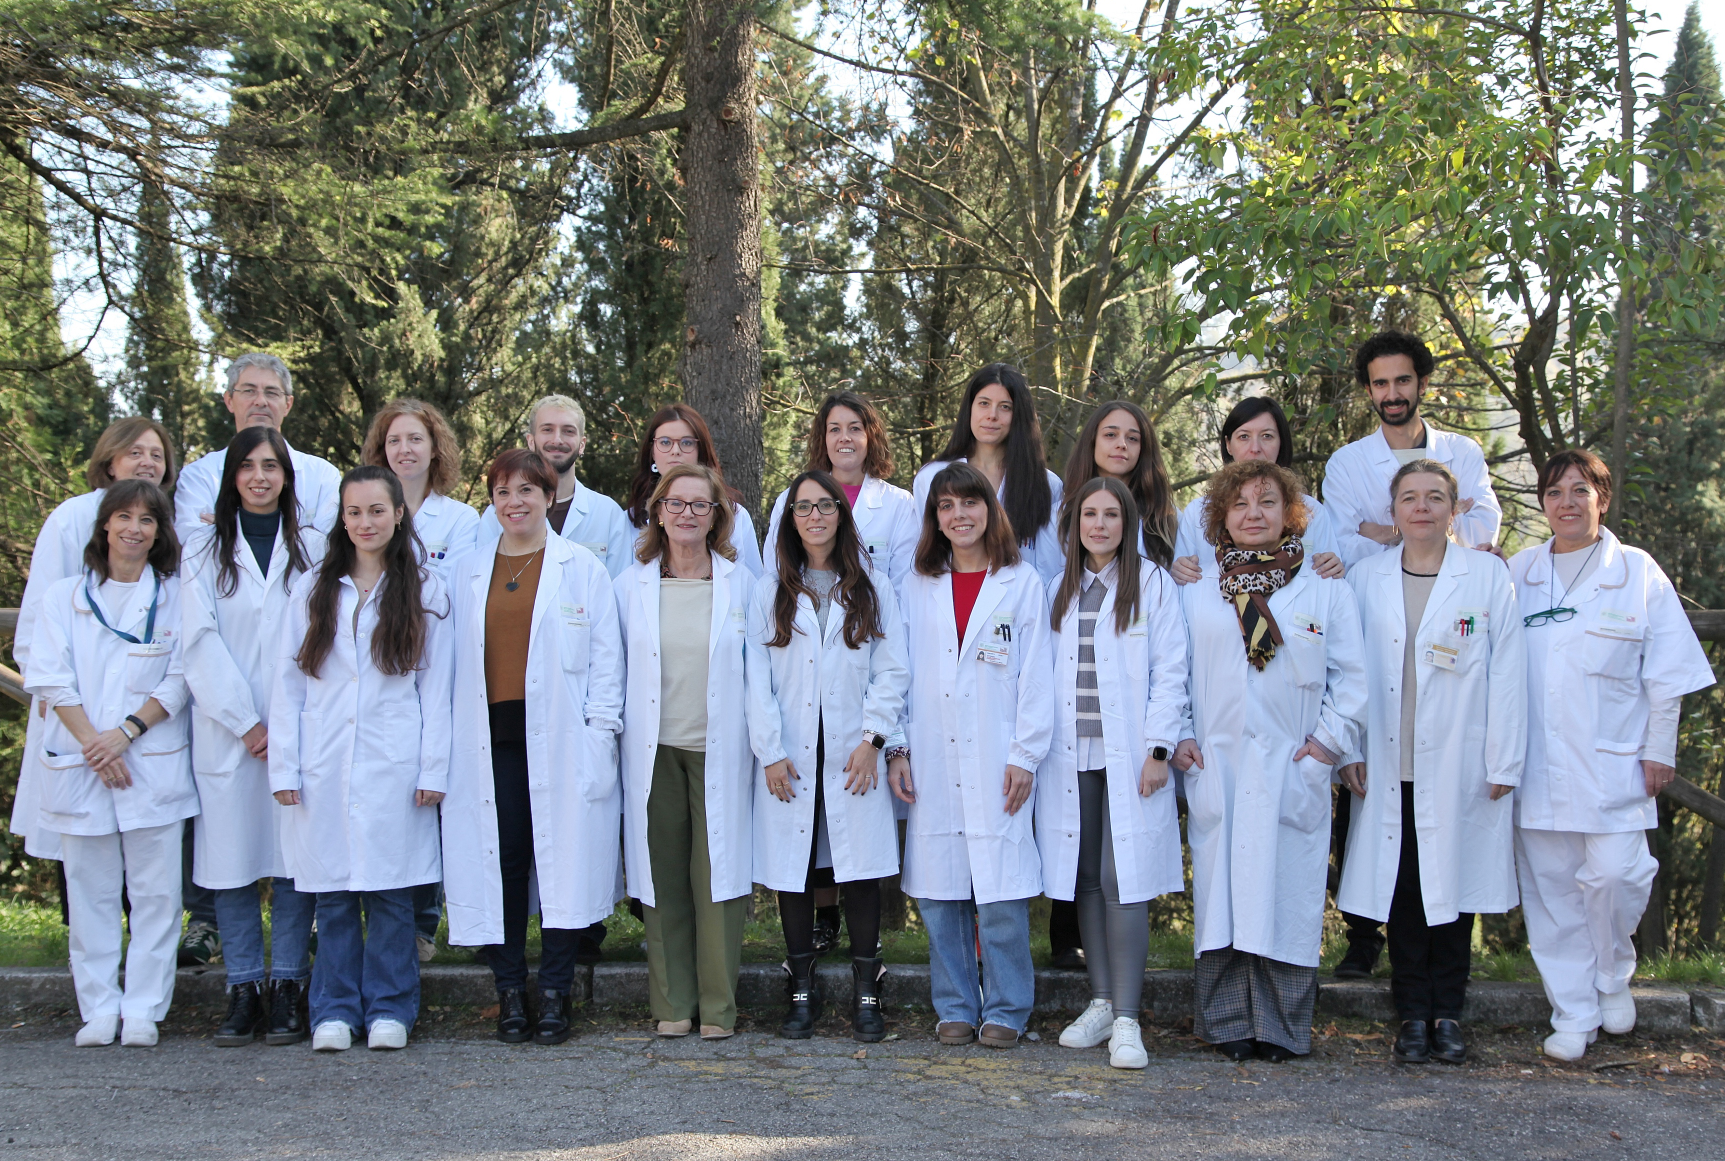 Group photo of the staff of the Experimental Oncology Laboratory